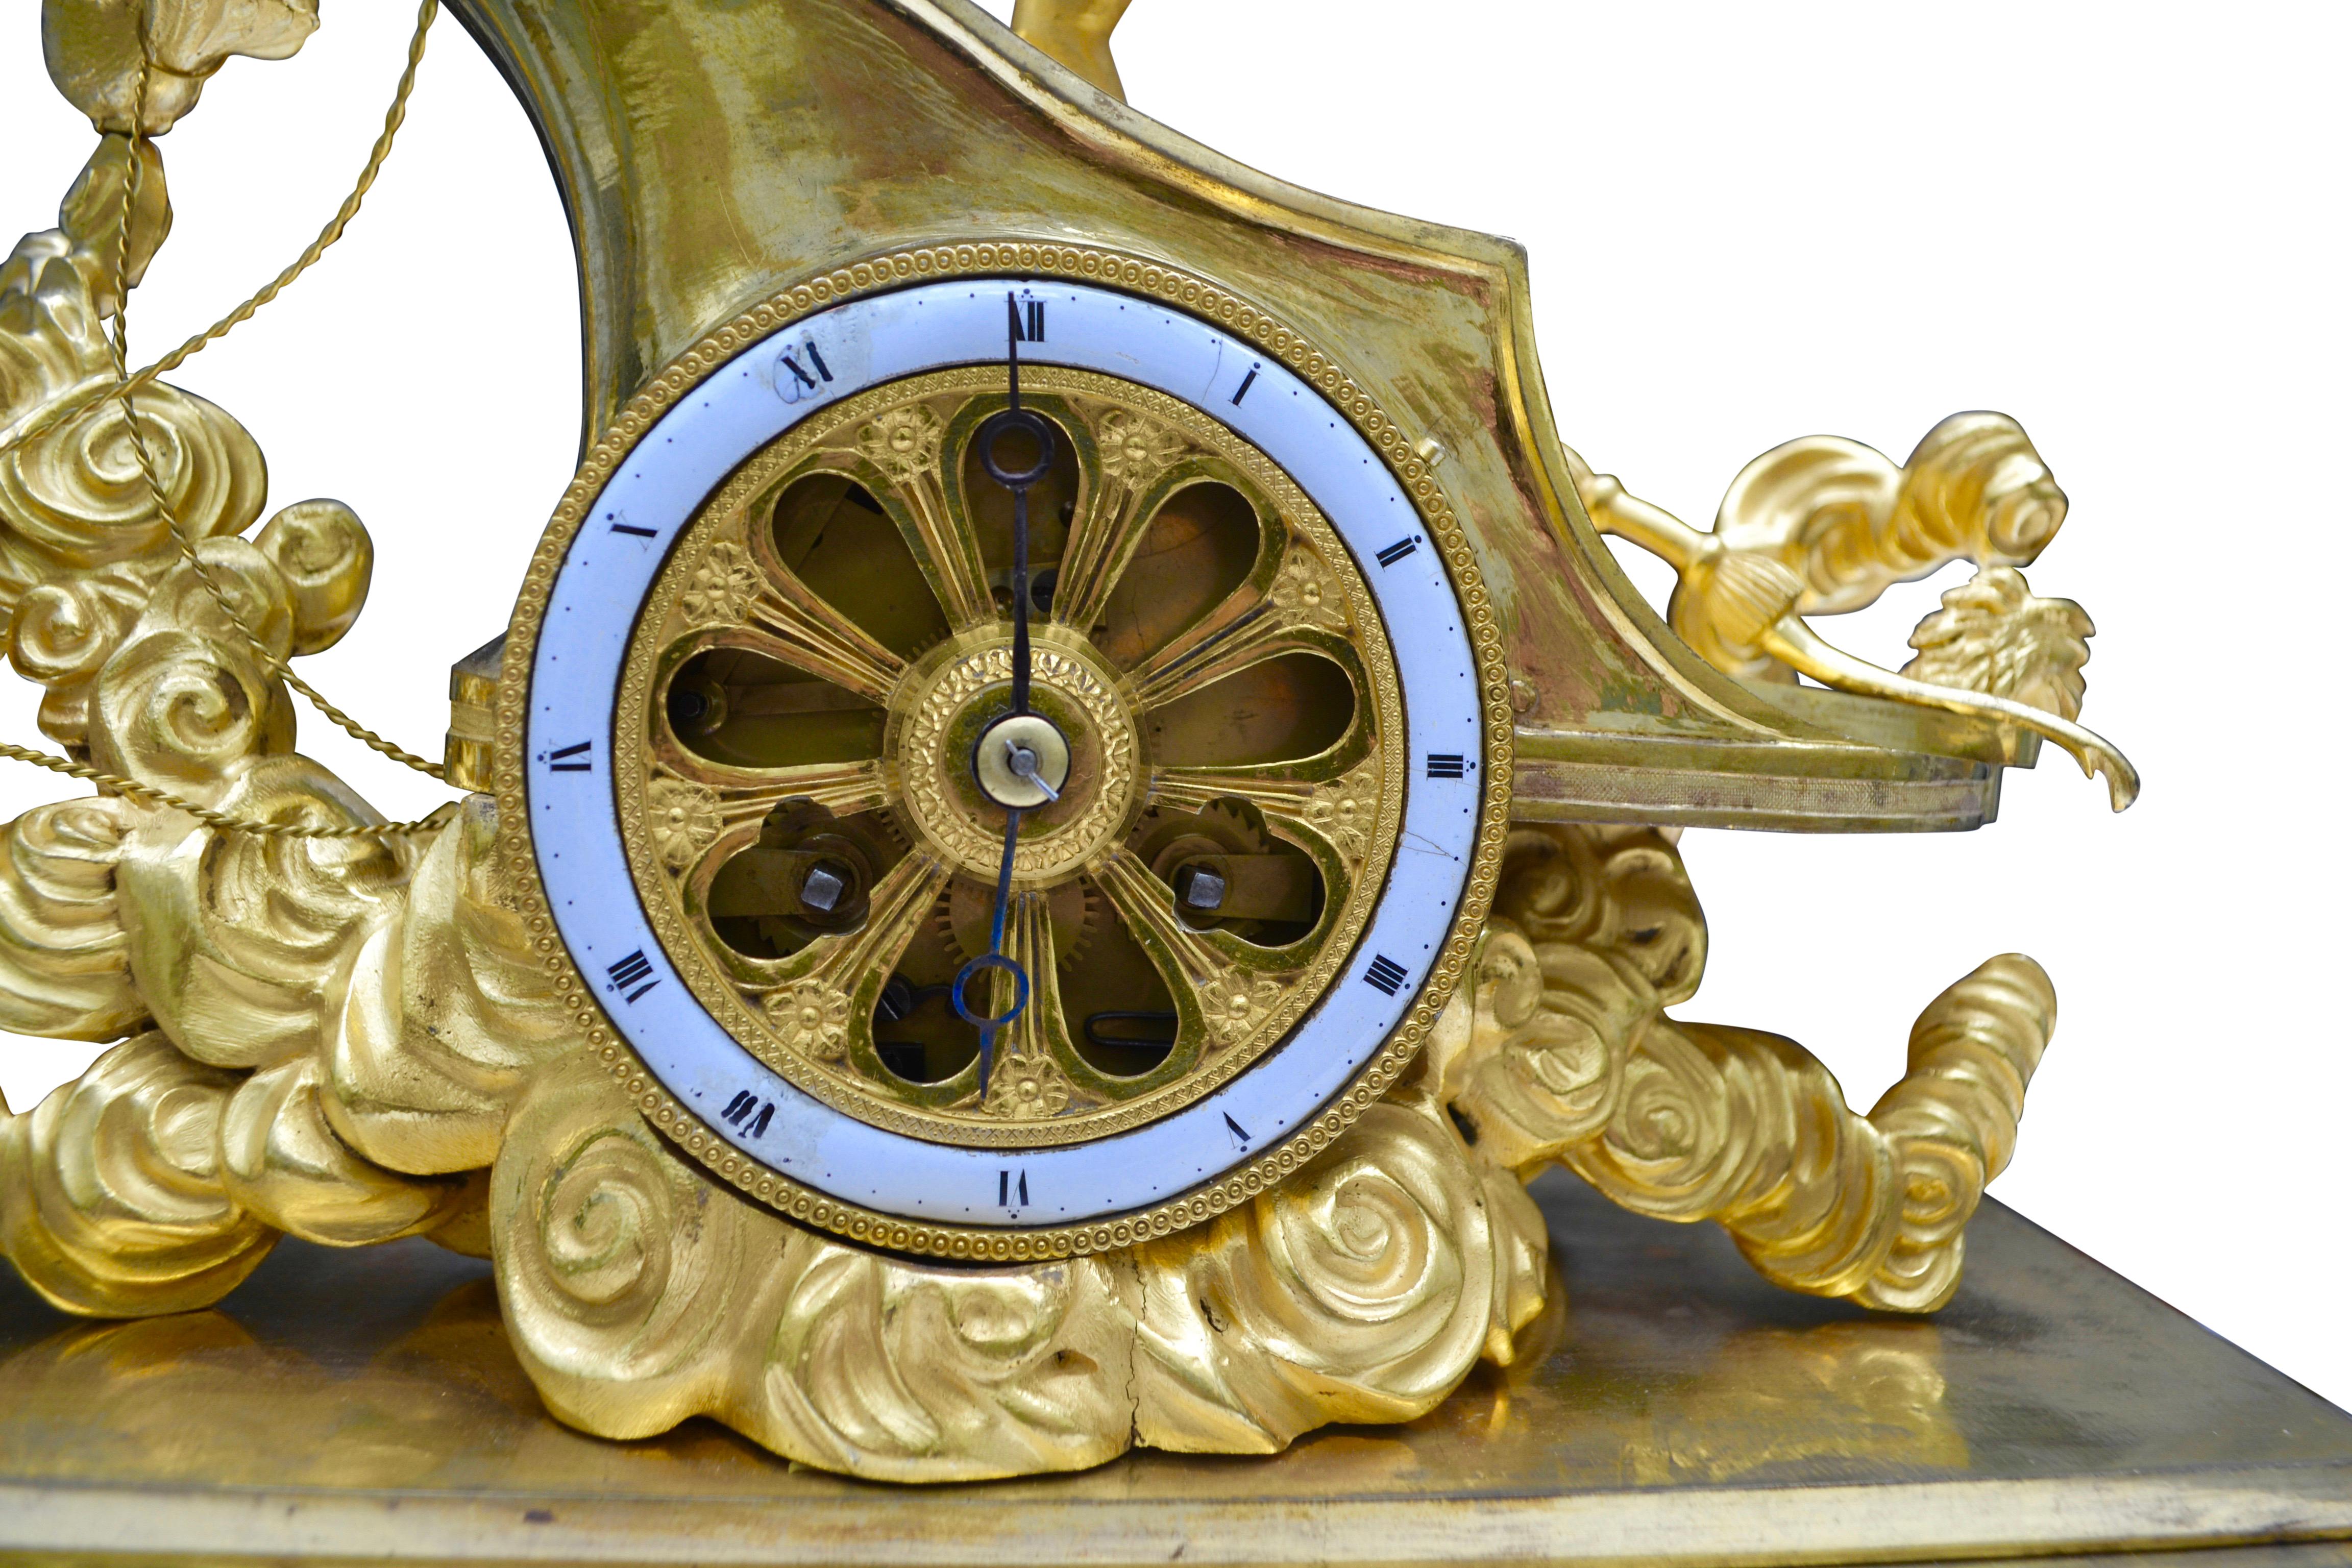 Period French Empire Mantle Clock In Good Condition For Sale In Vancouver, British Columbia